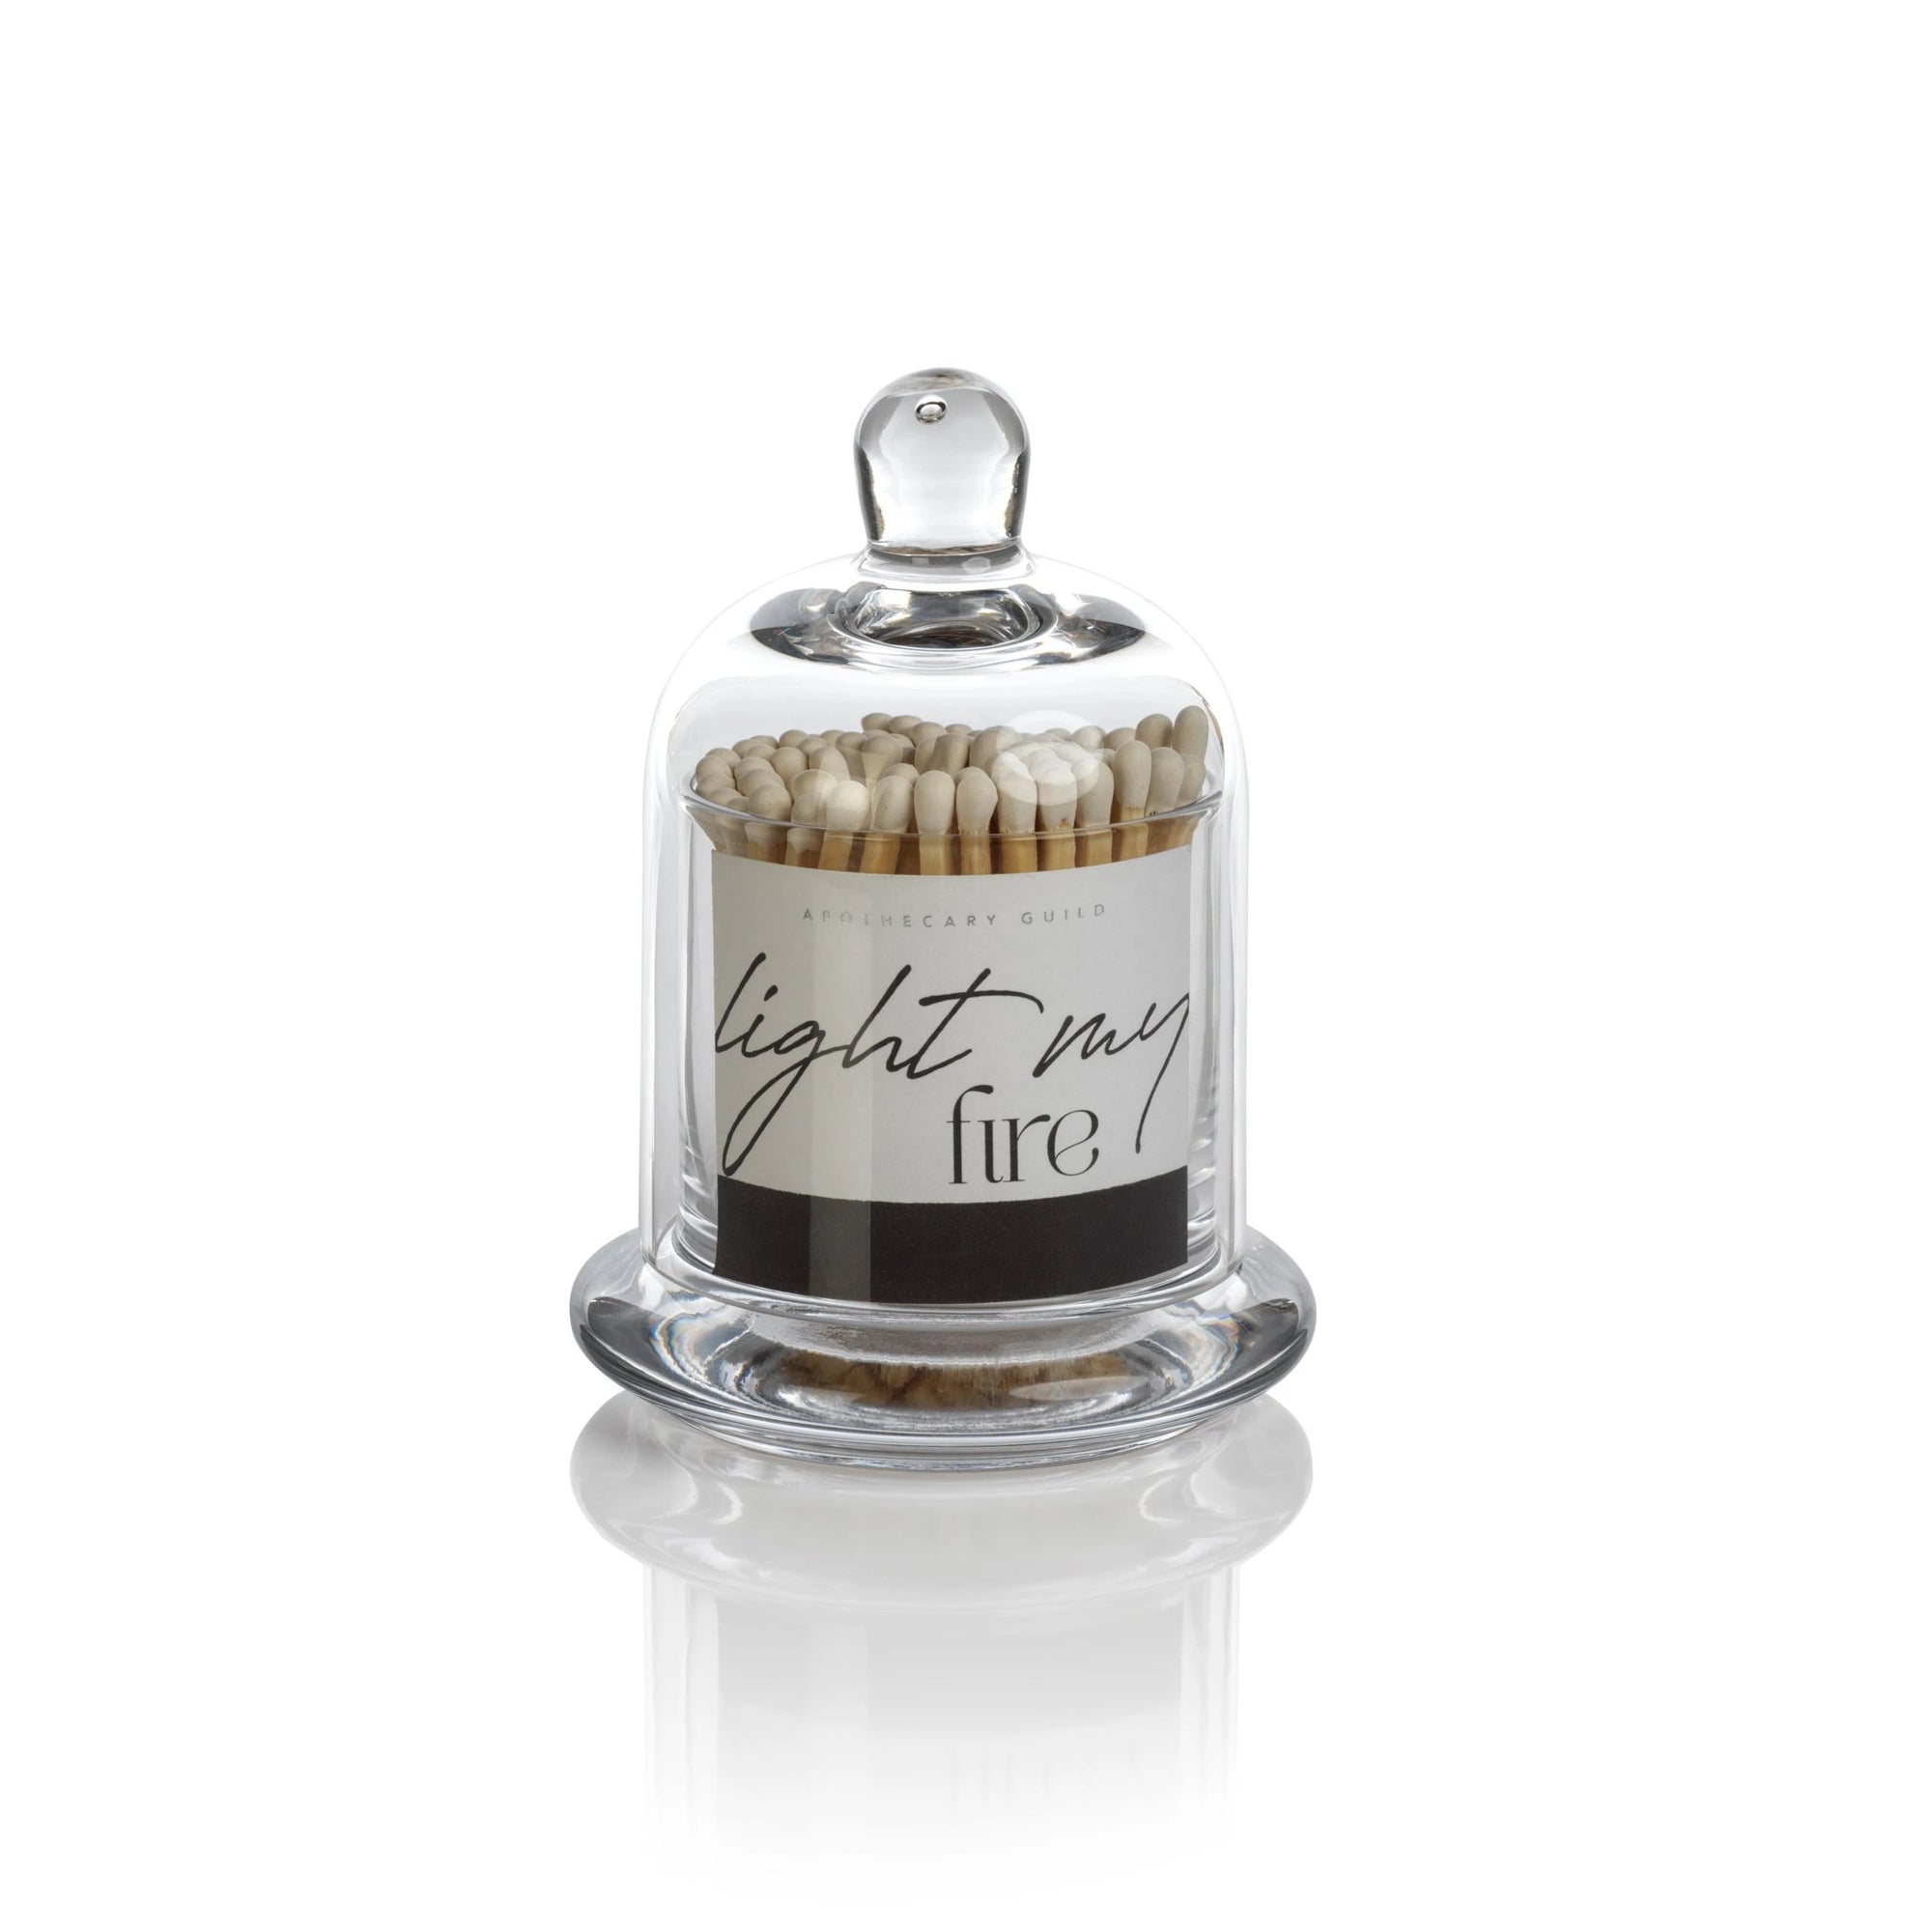 Light My Fire Matches - Apothecary Jar, Assorted Colors